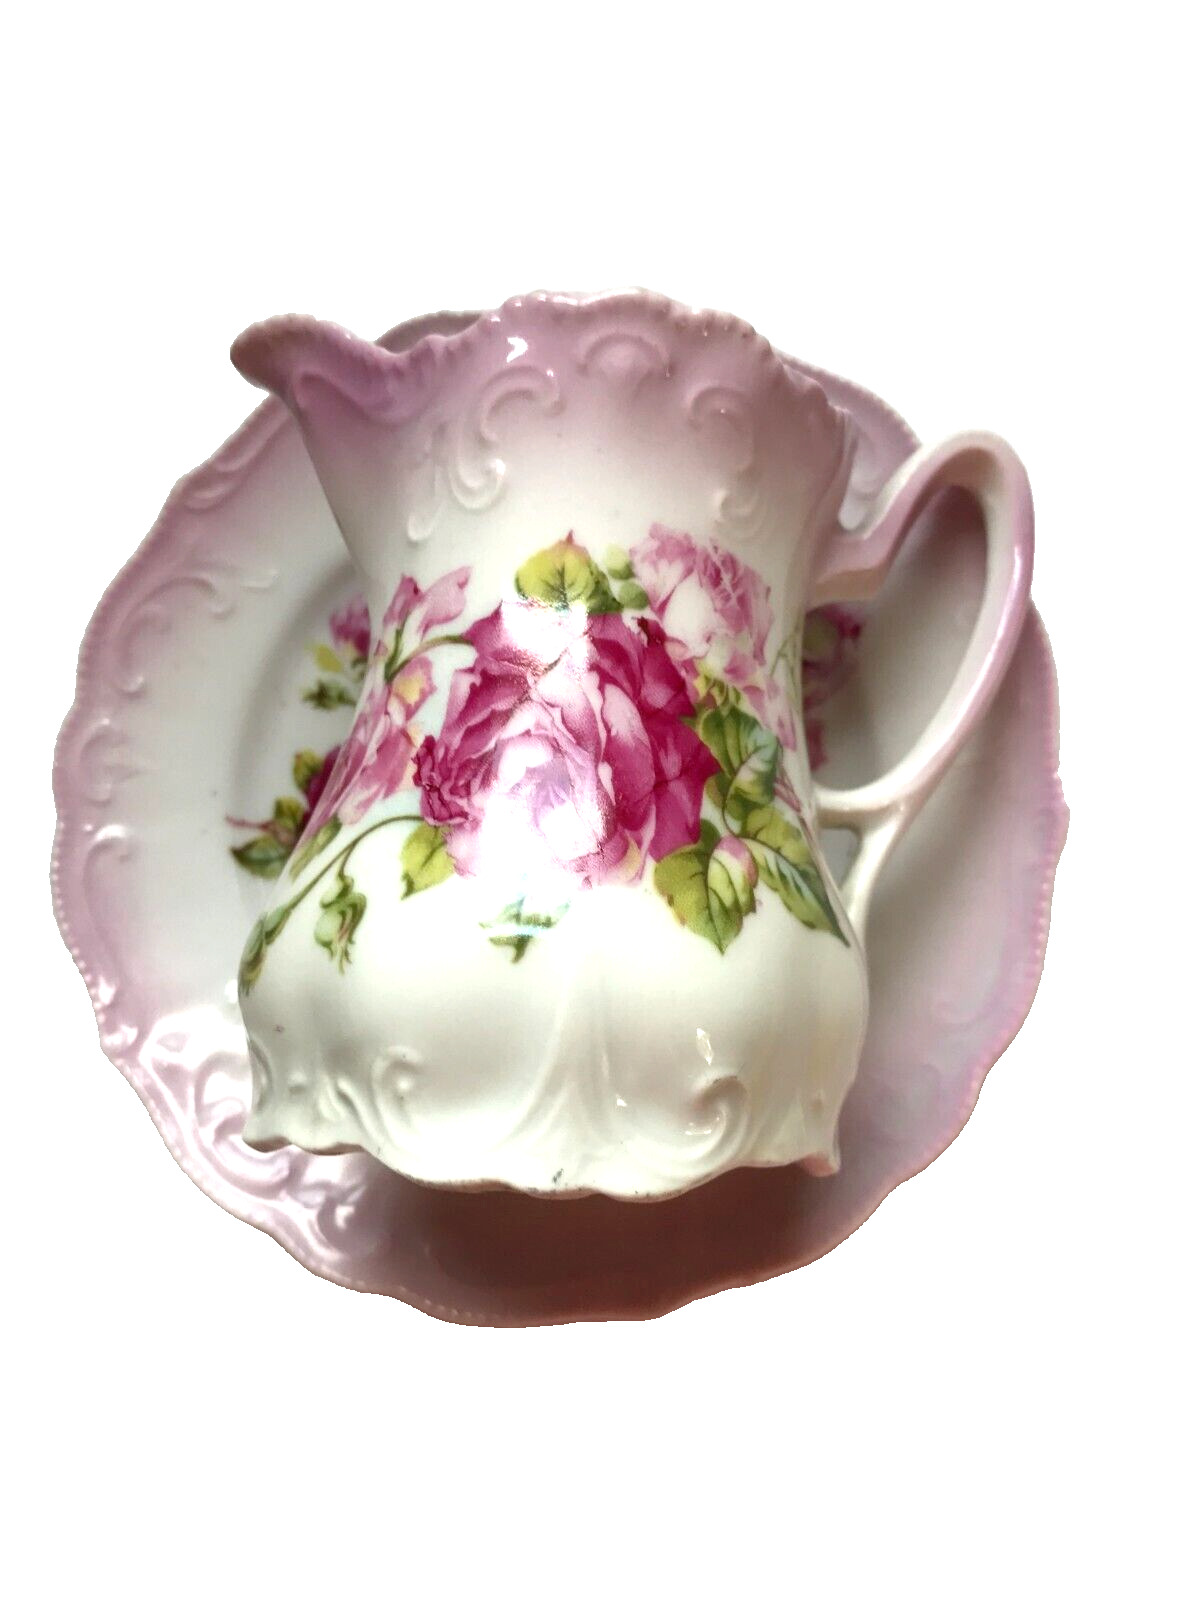 PINK ROSE FLORAL CREAMER WITH UNDERPLATE